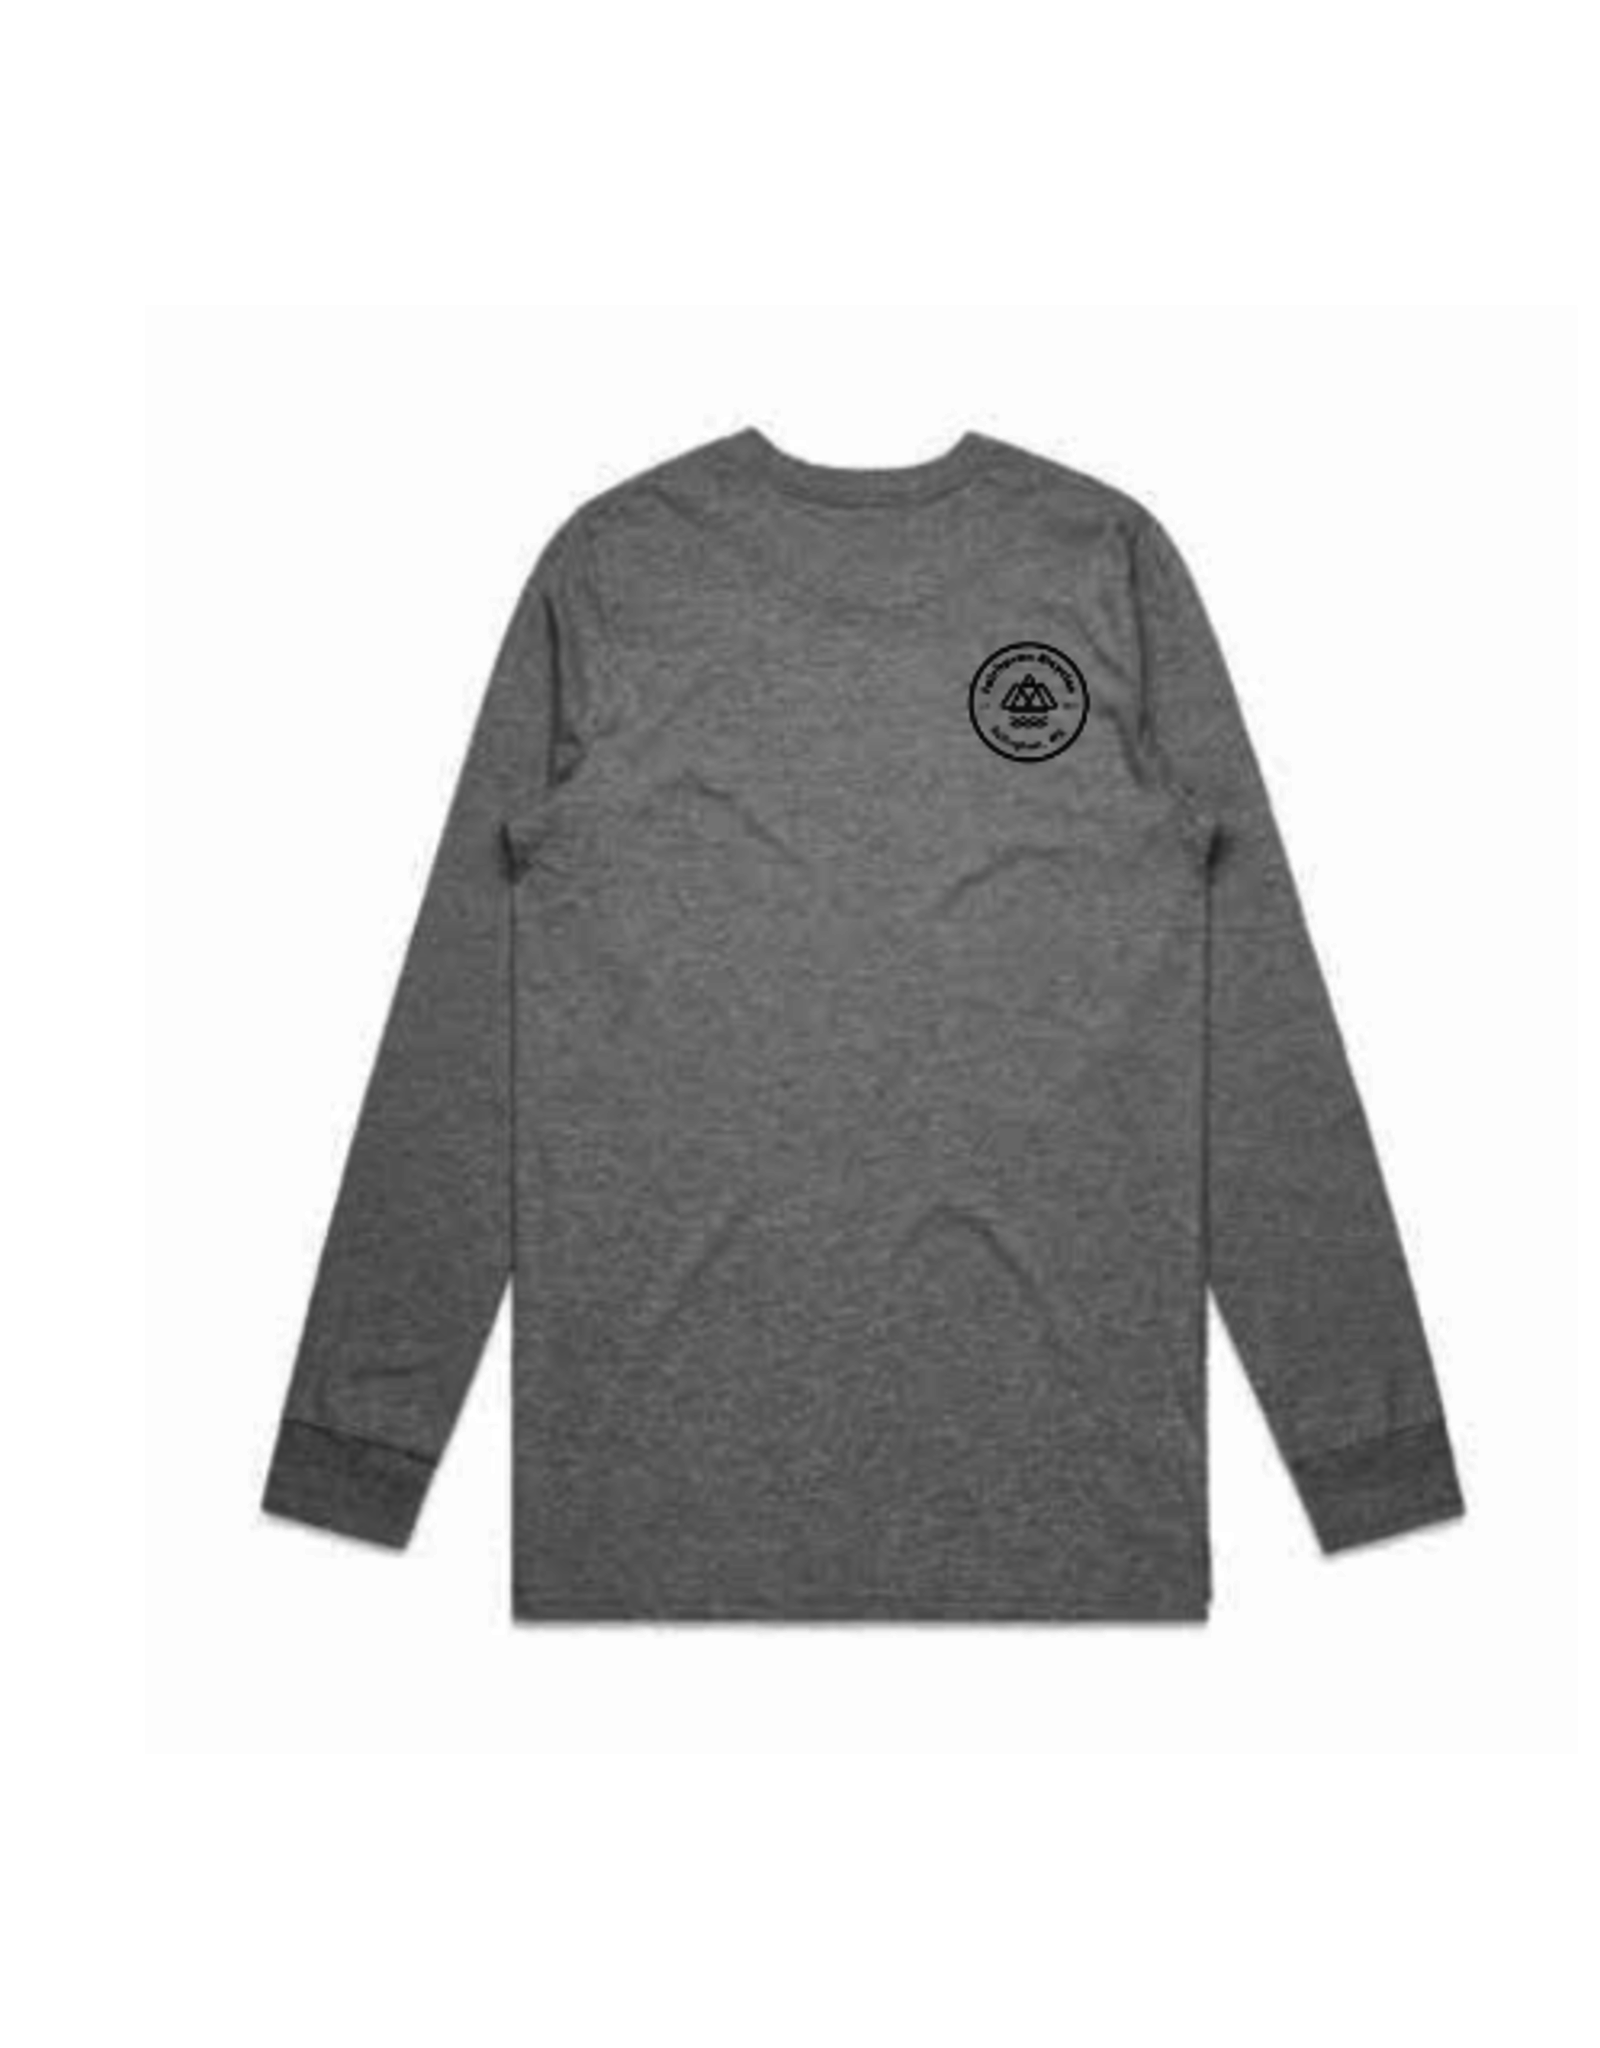 ASColor Fairhaven Bicycles Long Sleeve T-Shirt